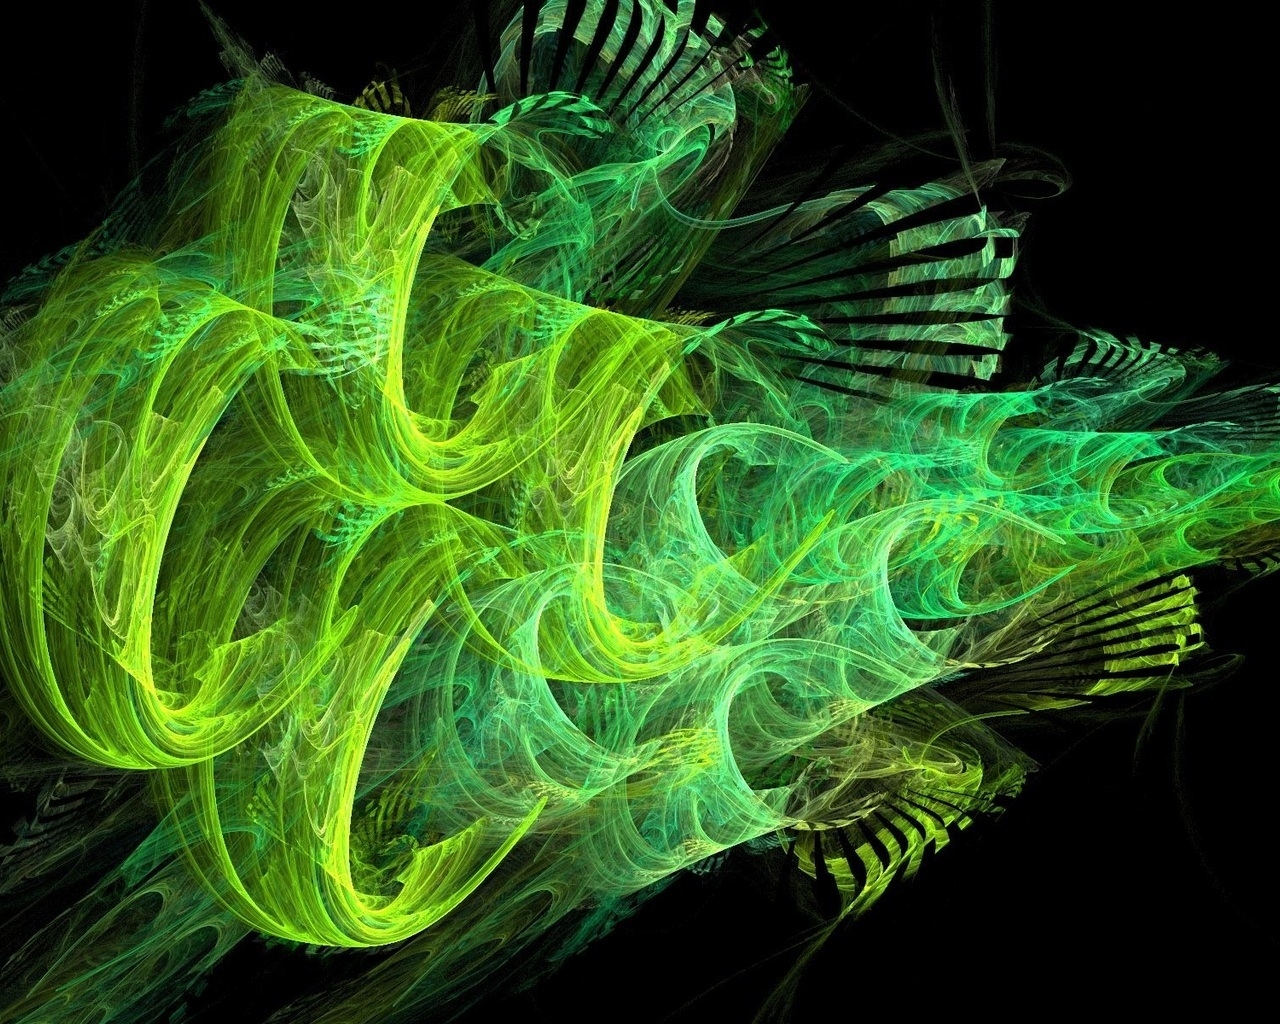 Abstract Fractal for 1280 x 1024 resolution